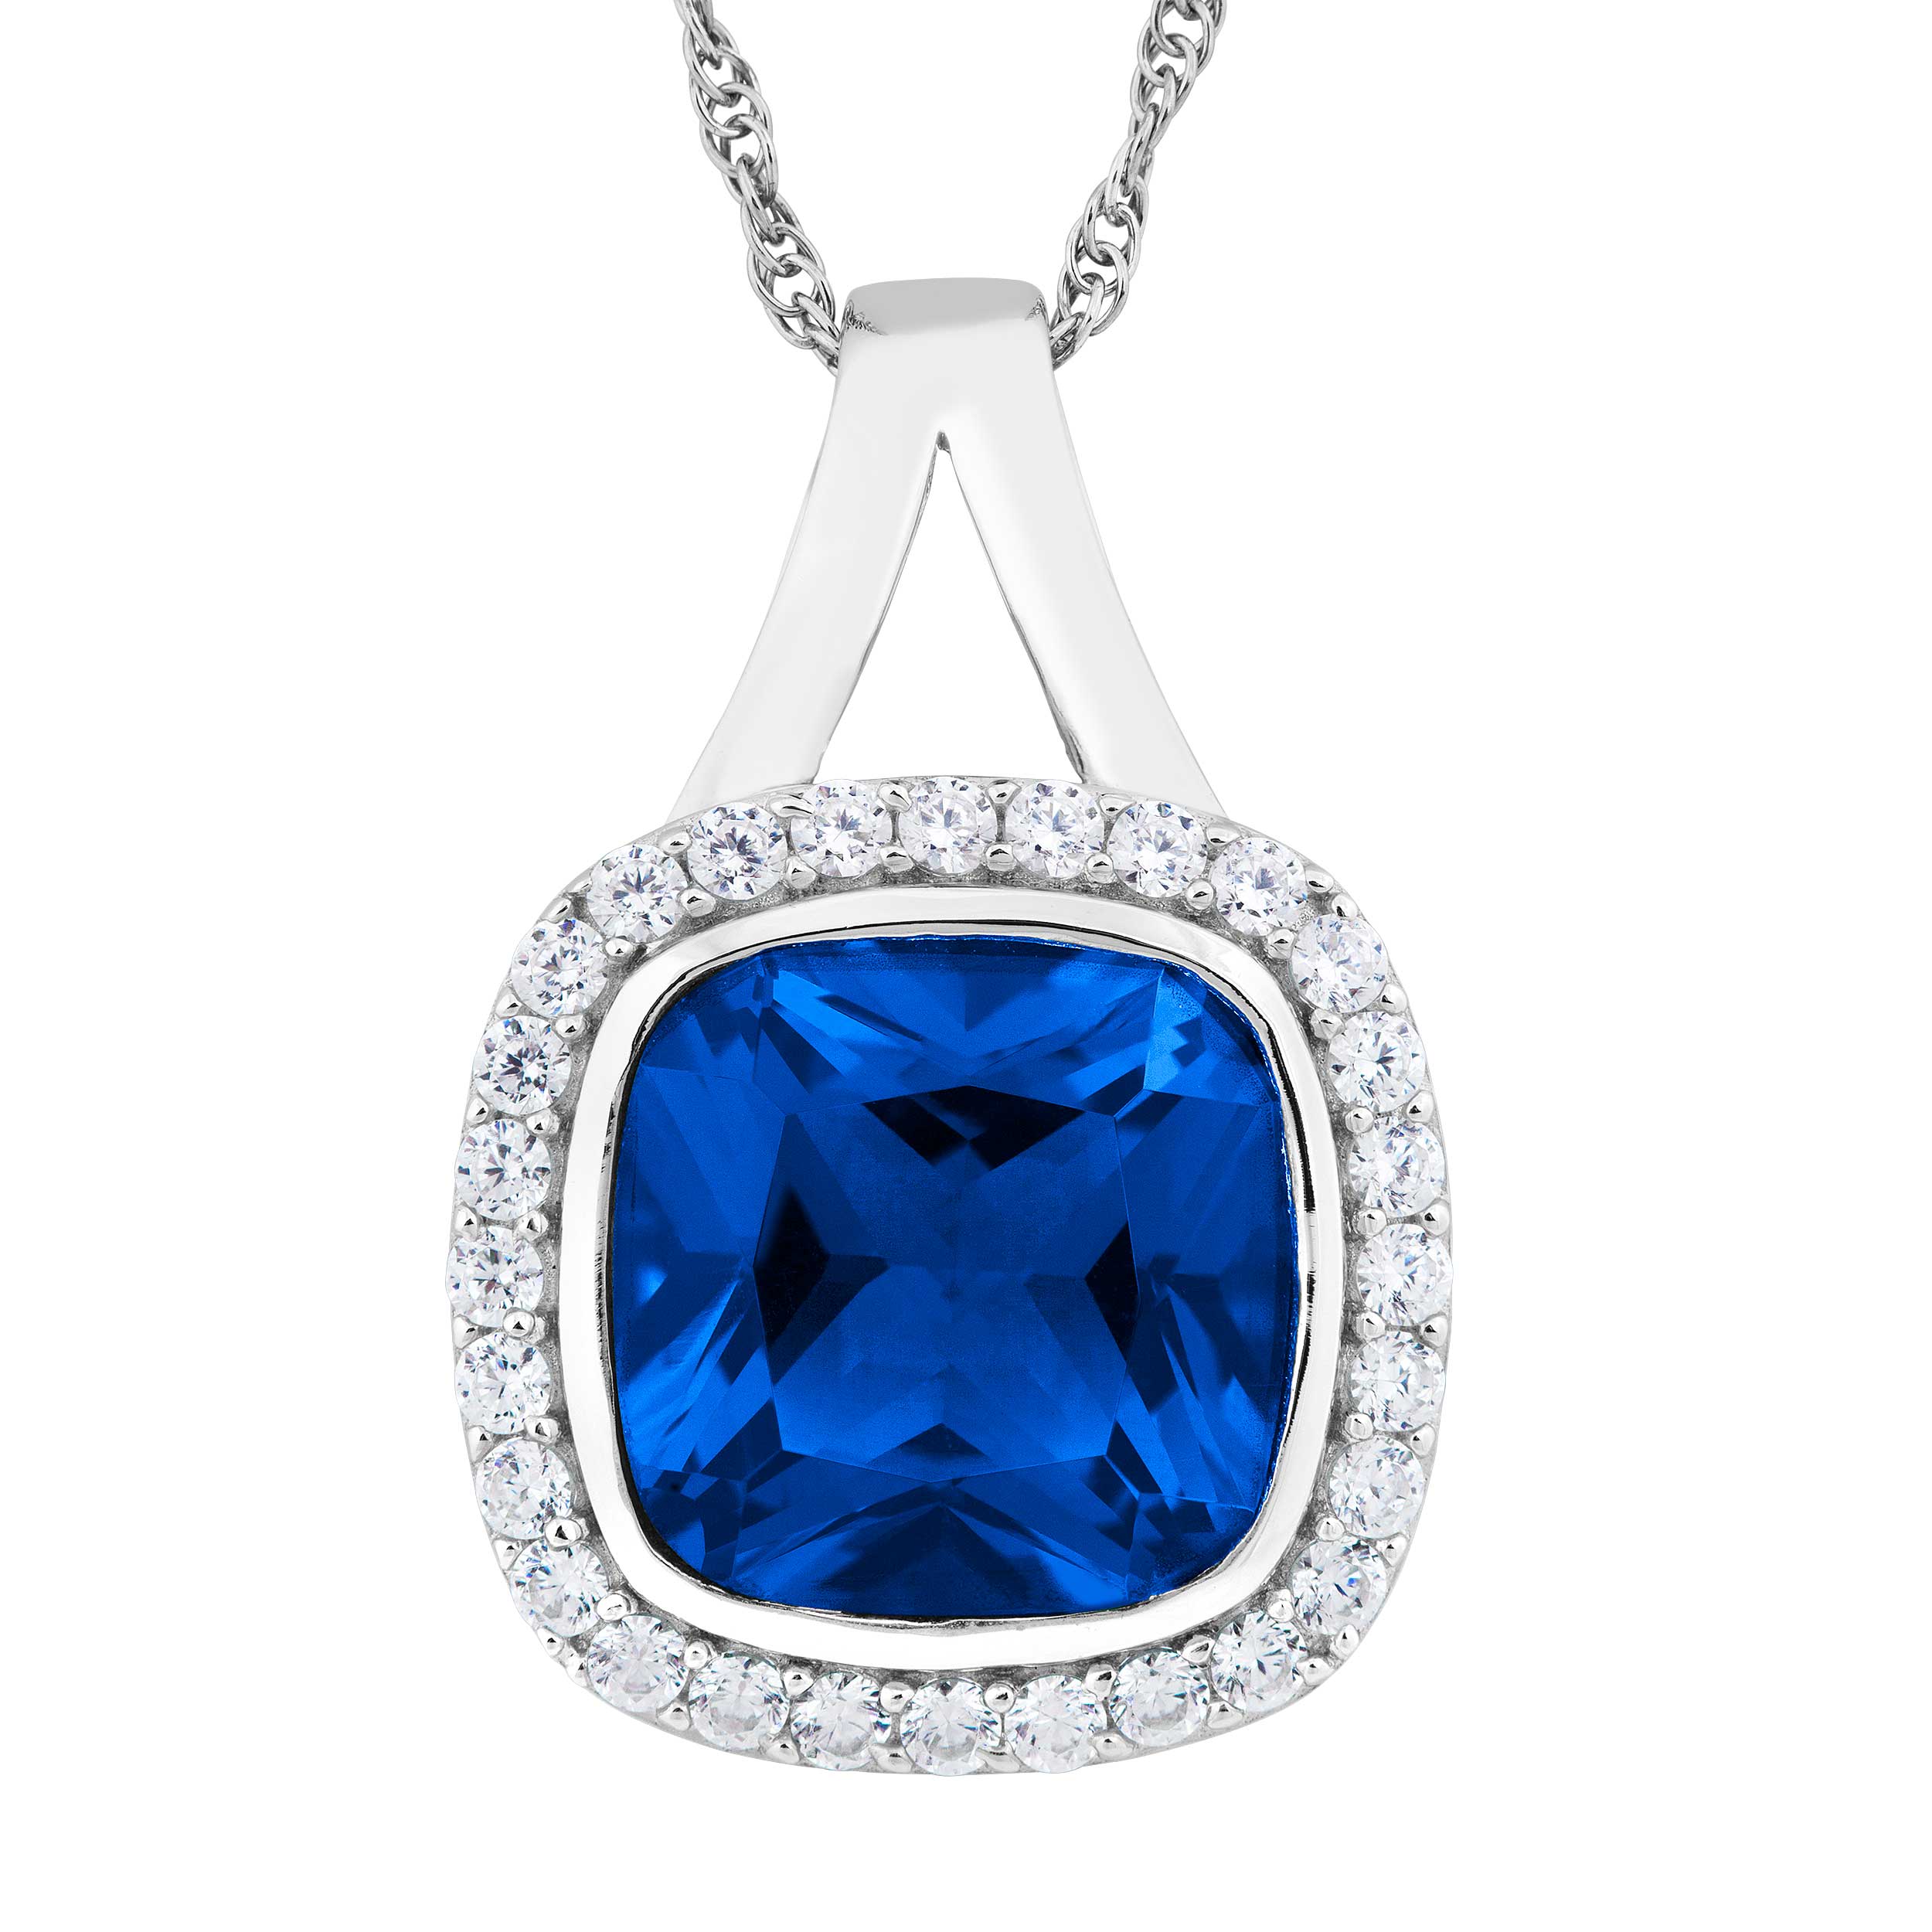 Inlaid Cushion-Cut Created Blue Sapphire and White Topaz Stud Pendant Necklace, Rhodium Plated Sterling Silver